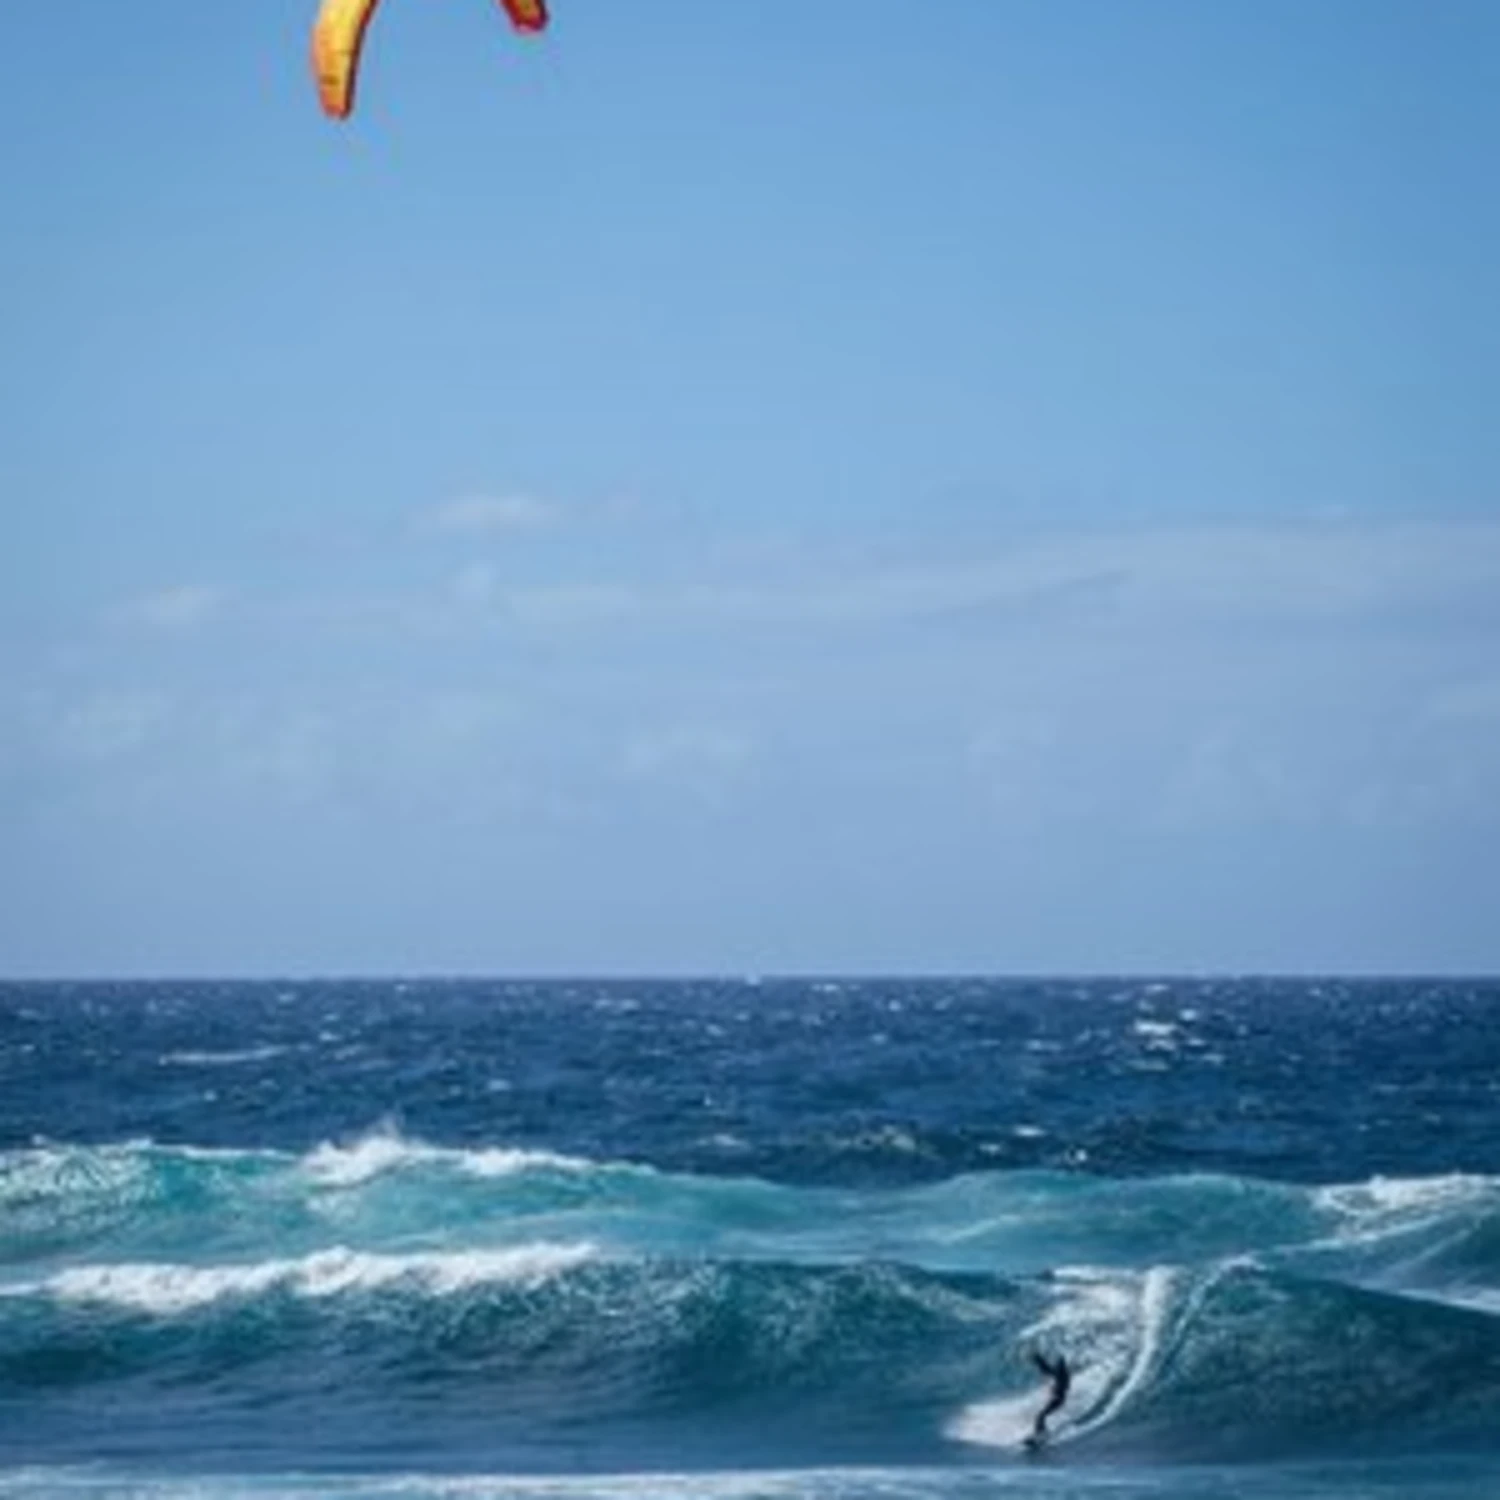 person paragliding on ocean waves